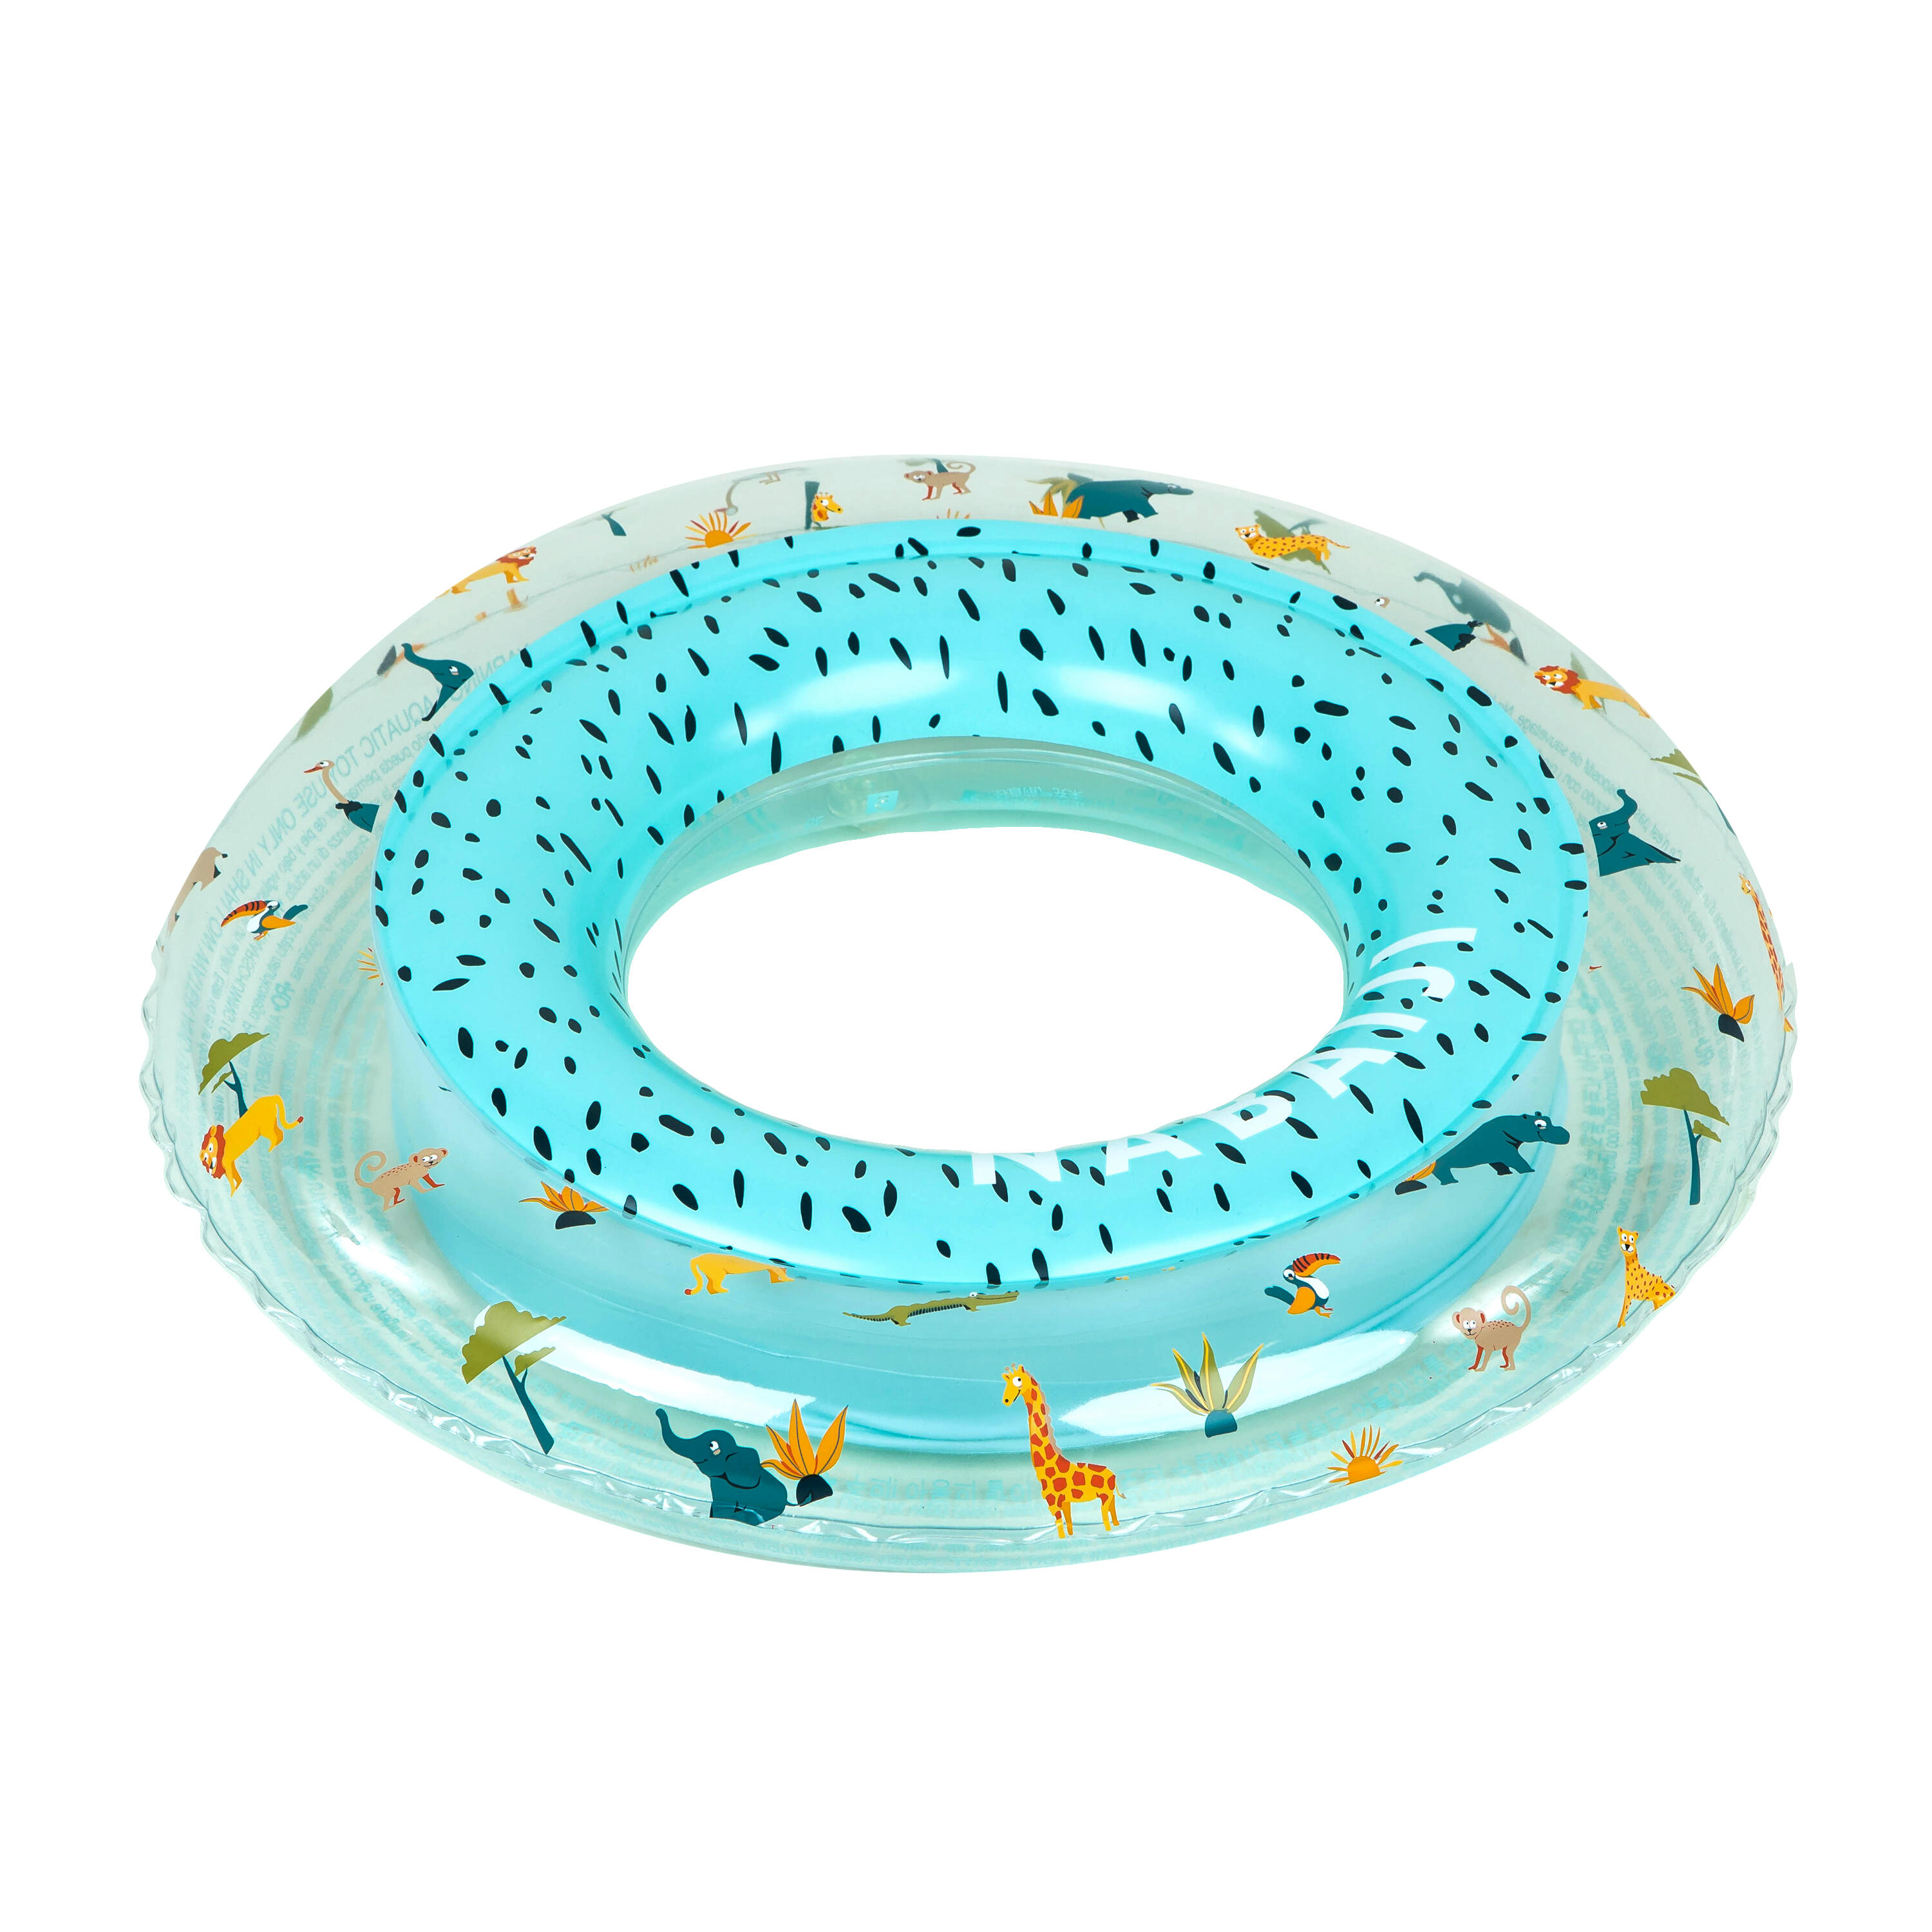 Mamadev®:- Adult Swimming Ring Adult Inflatable Pool Float Tube Circle  Water Toys Air Mattress Pool Swim Tube with 2 Handles (Size -  30''inch)(Multi Color)(8 Years up)(1 PIS) : Amazon.in: Toys & Games